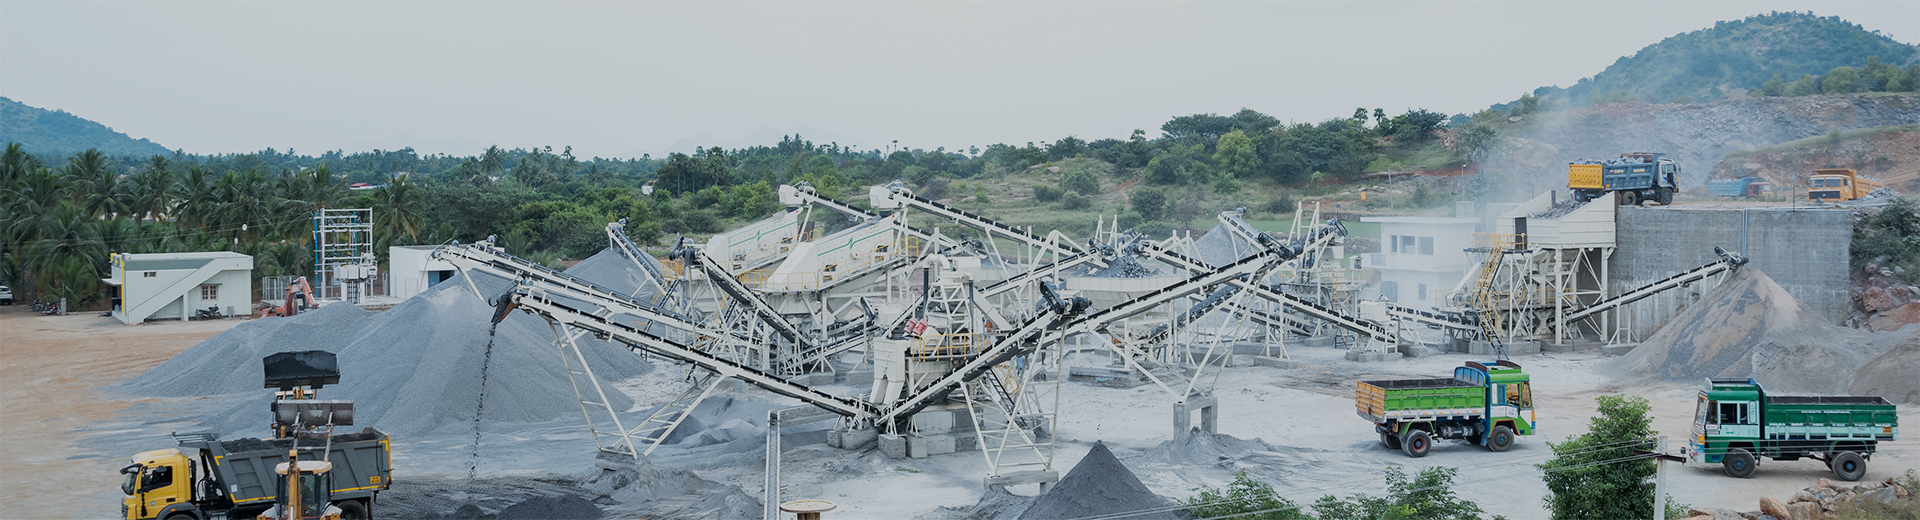 How to improve the performance of crusher’s lubricating system?